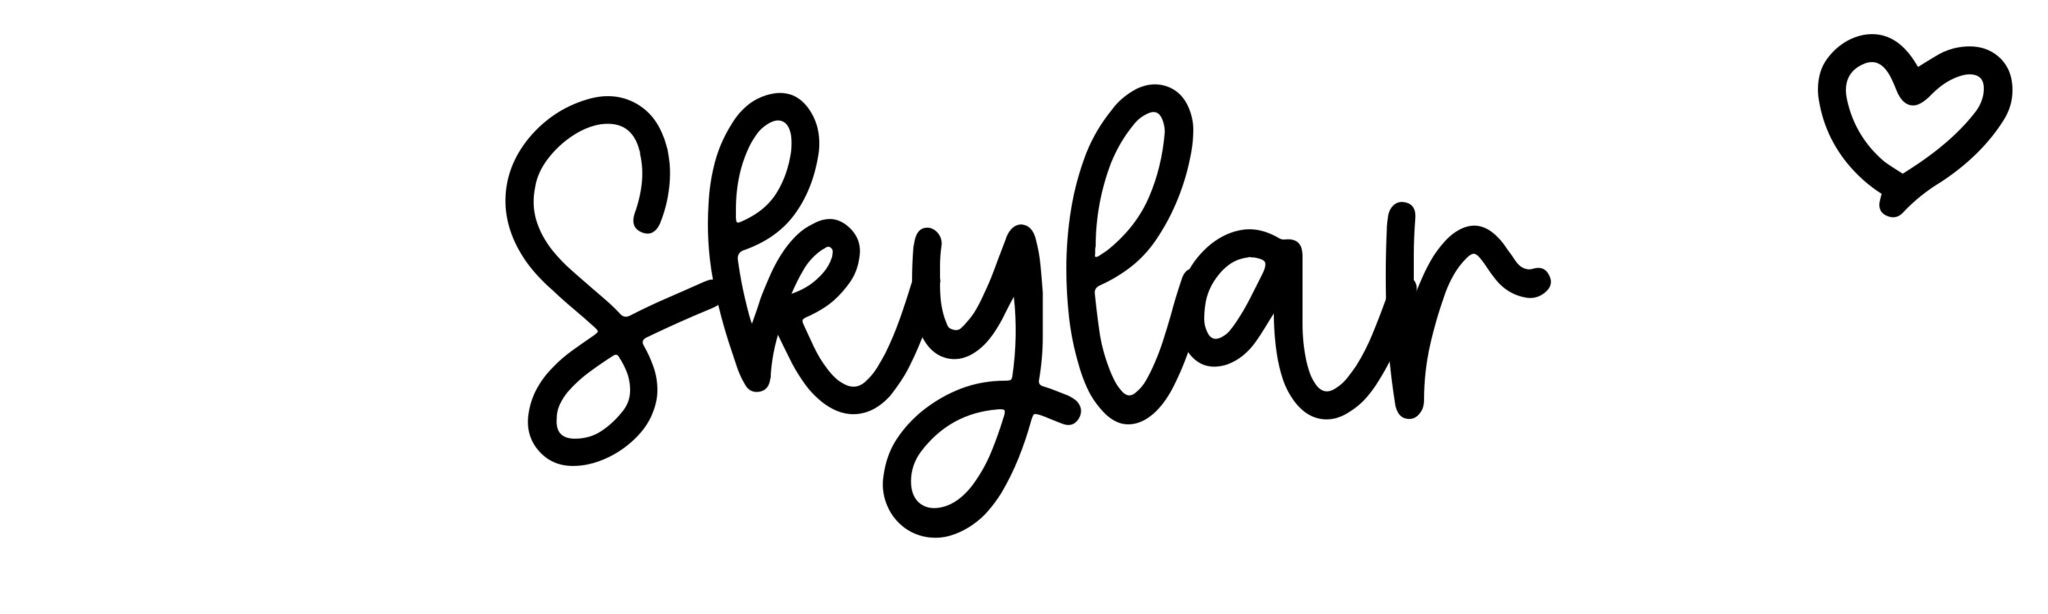 Skylar - Name meaning, origin, variations and more